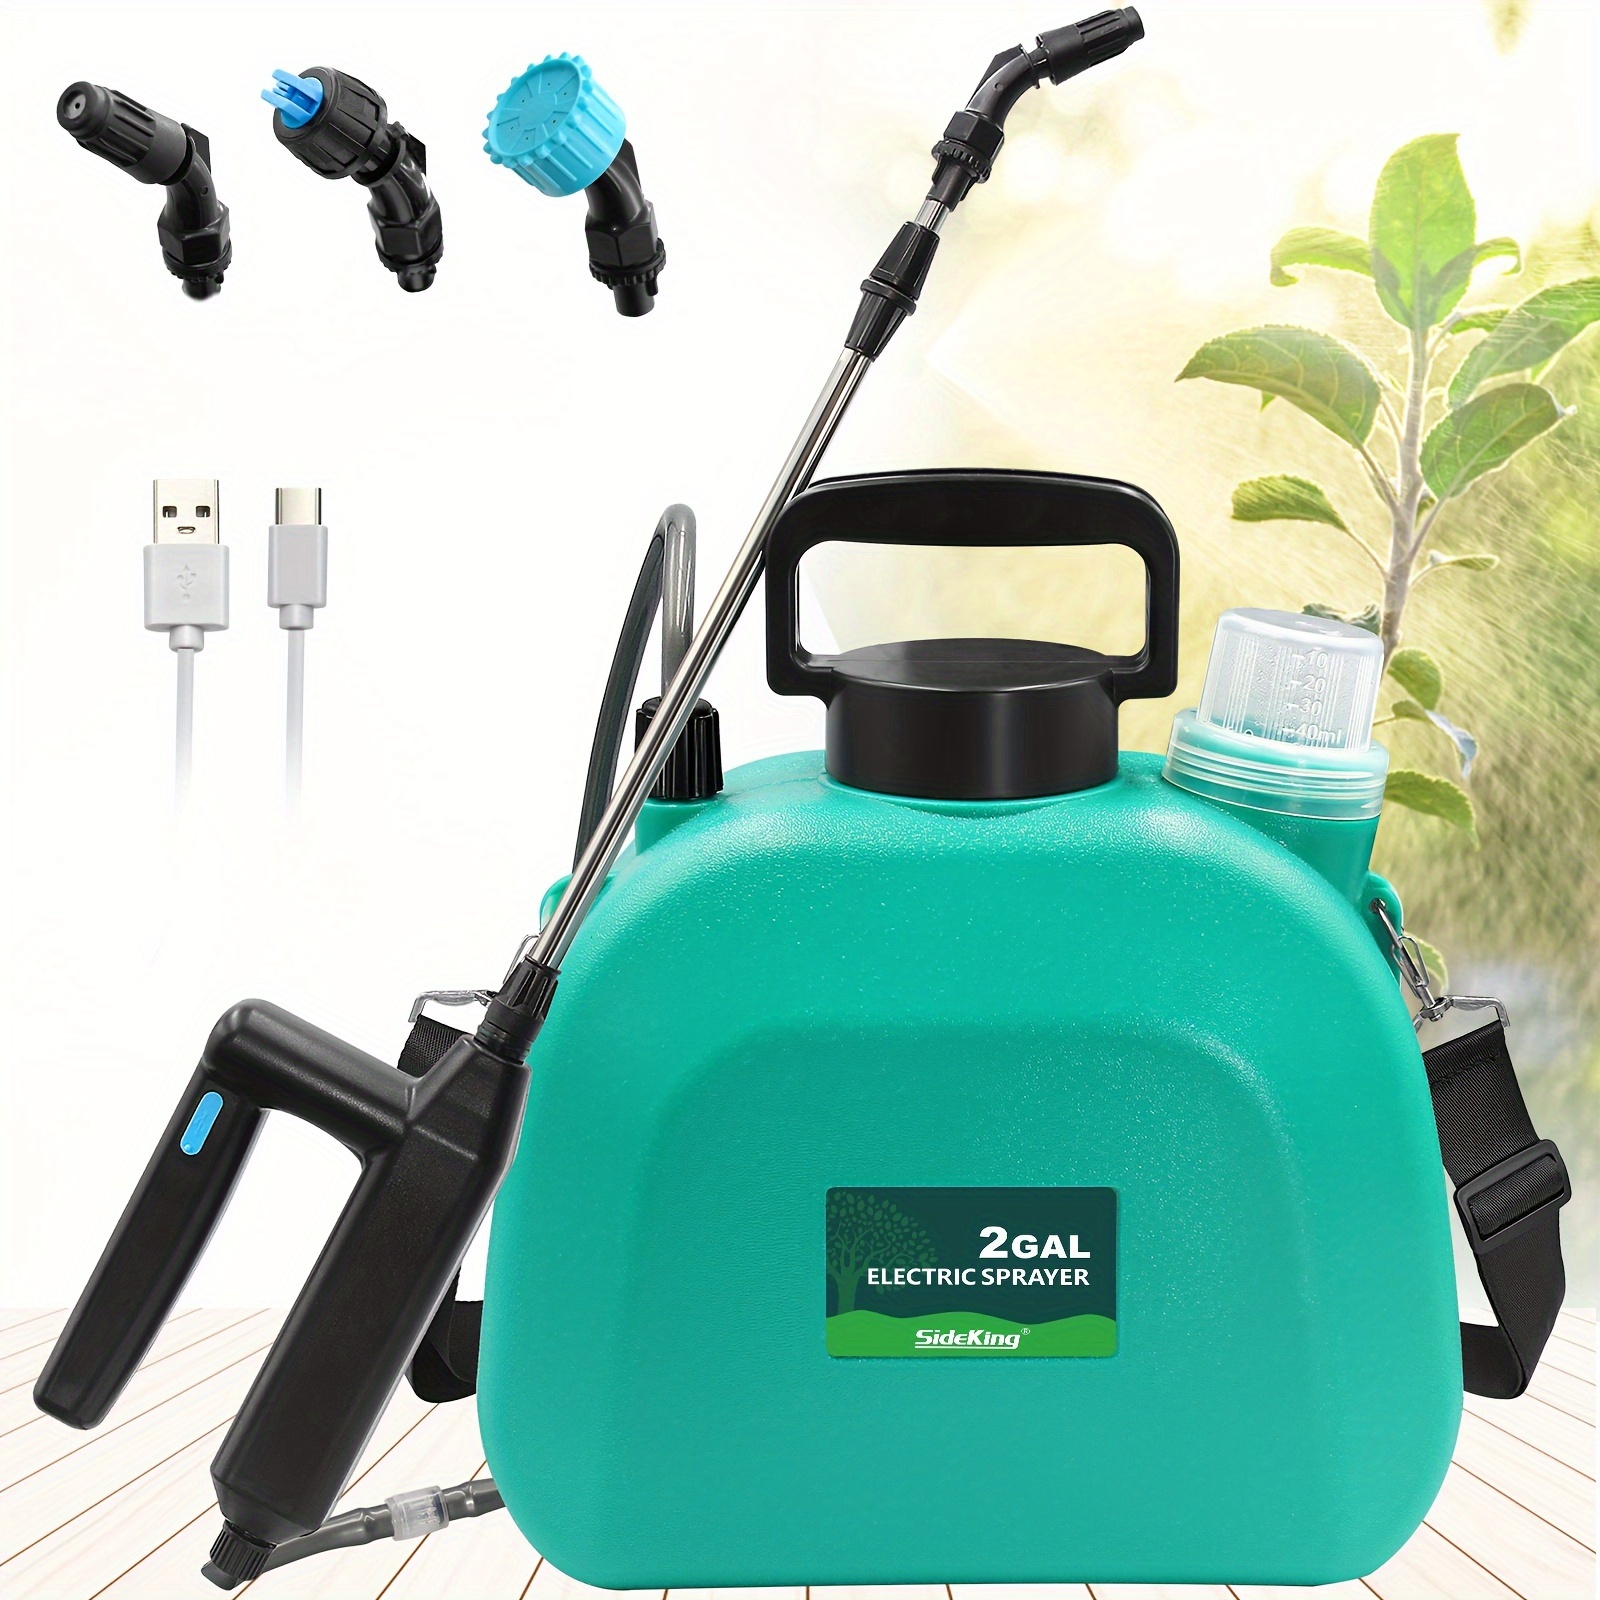 

Battery Powered Sprayer 2 Gallon, Upgrade Powerful Electric Sprayer With 3 Mist Nozzles, Retractable Wand, Rechargeable Handle, Garden Sprayer With Adjustable Shoulder Strap For Lawn & Garden